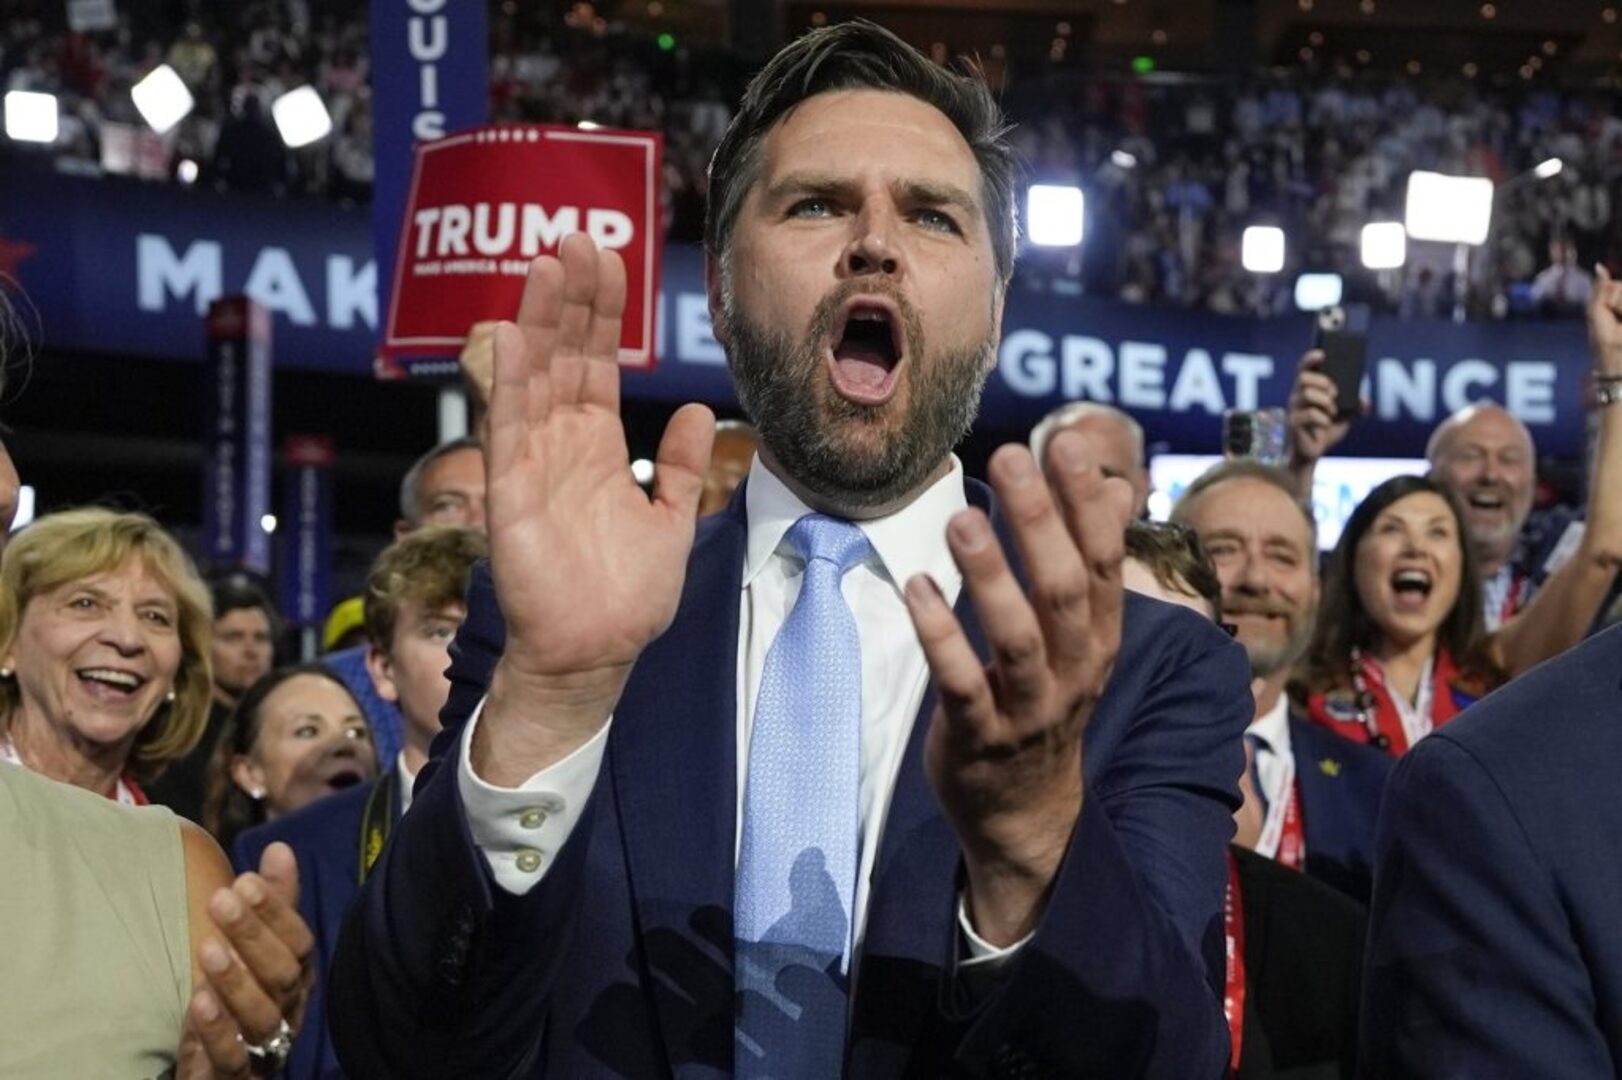 Who is Trump's running mate JD Vance?